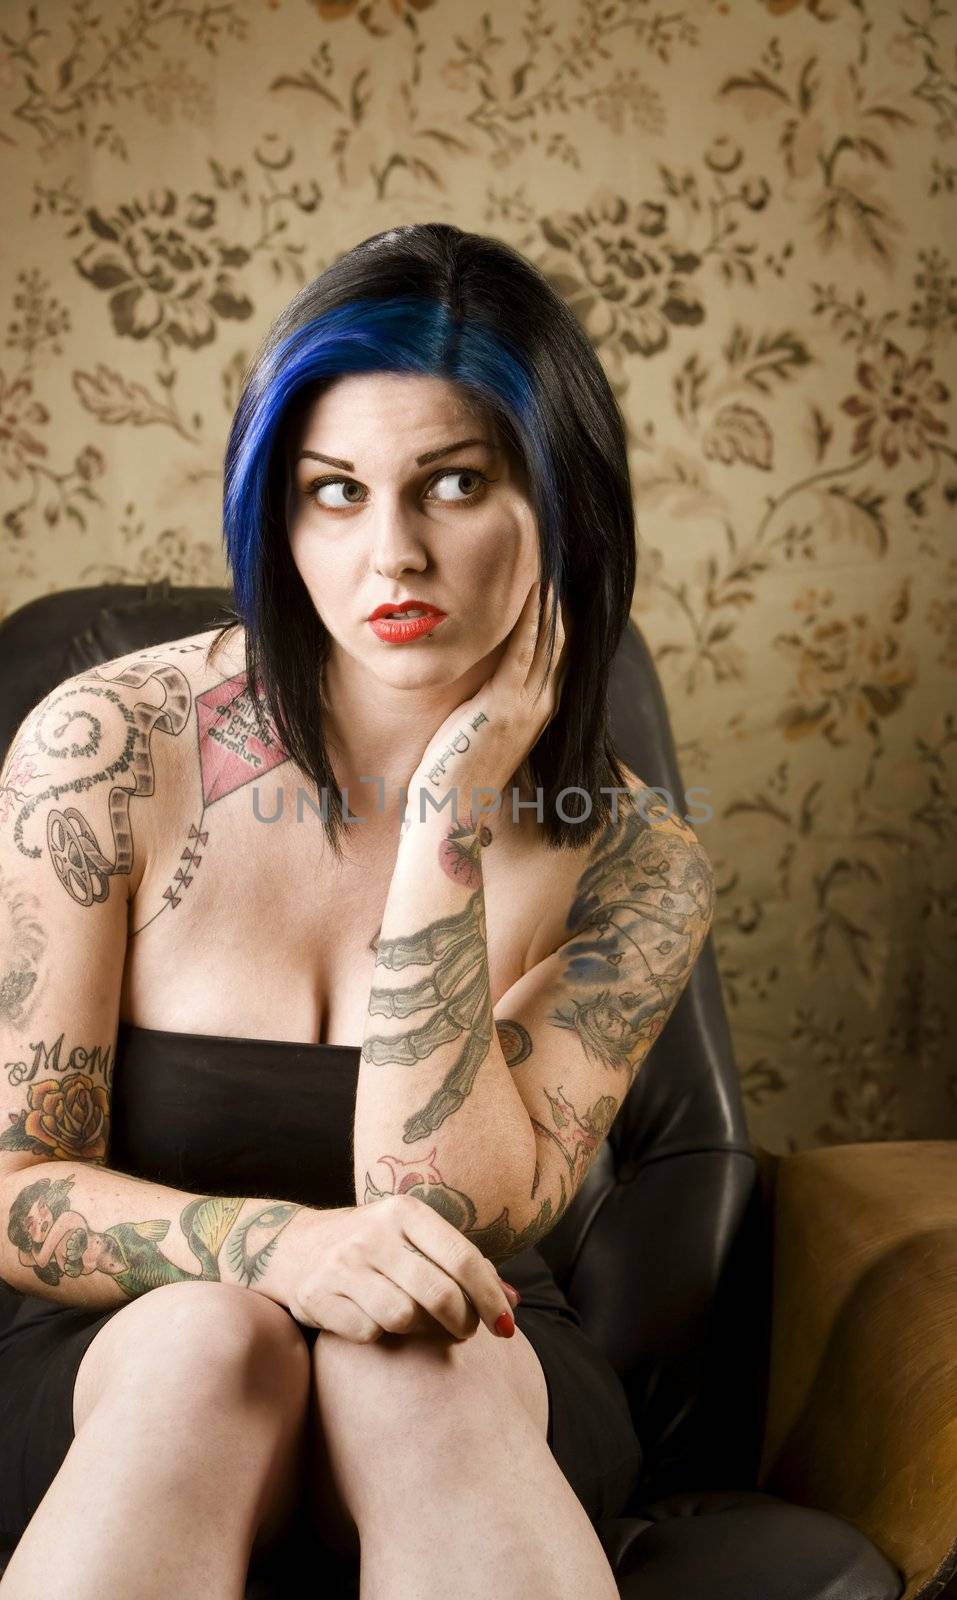 Pretty Woman with Tattoos in a Leather Chair by Creatista